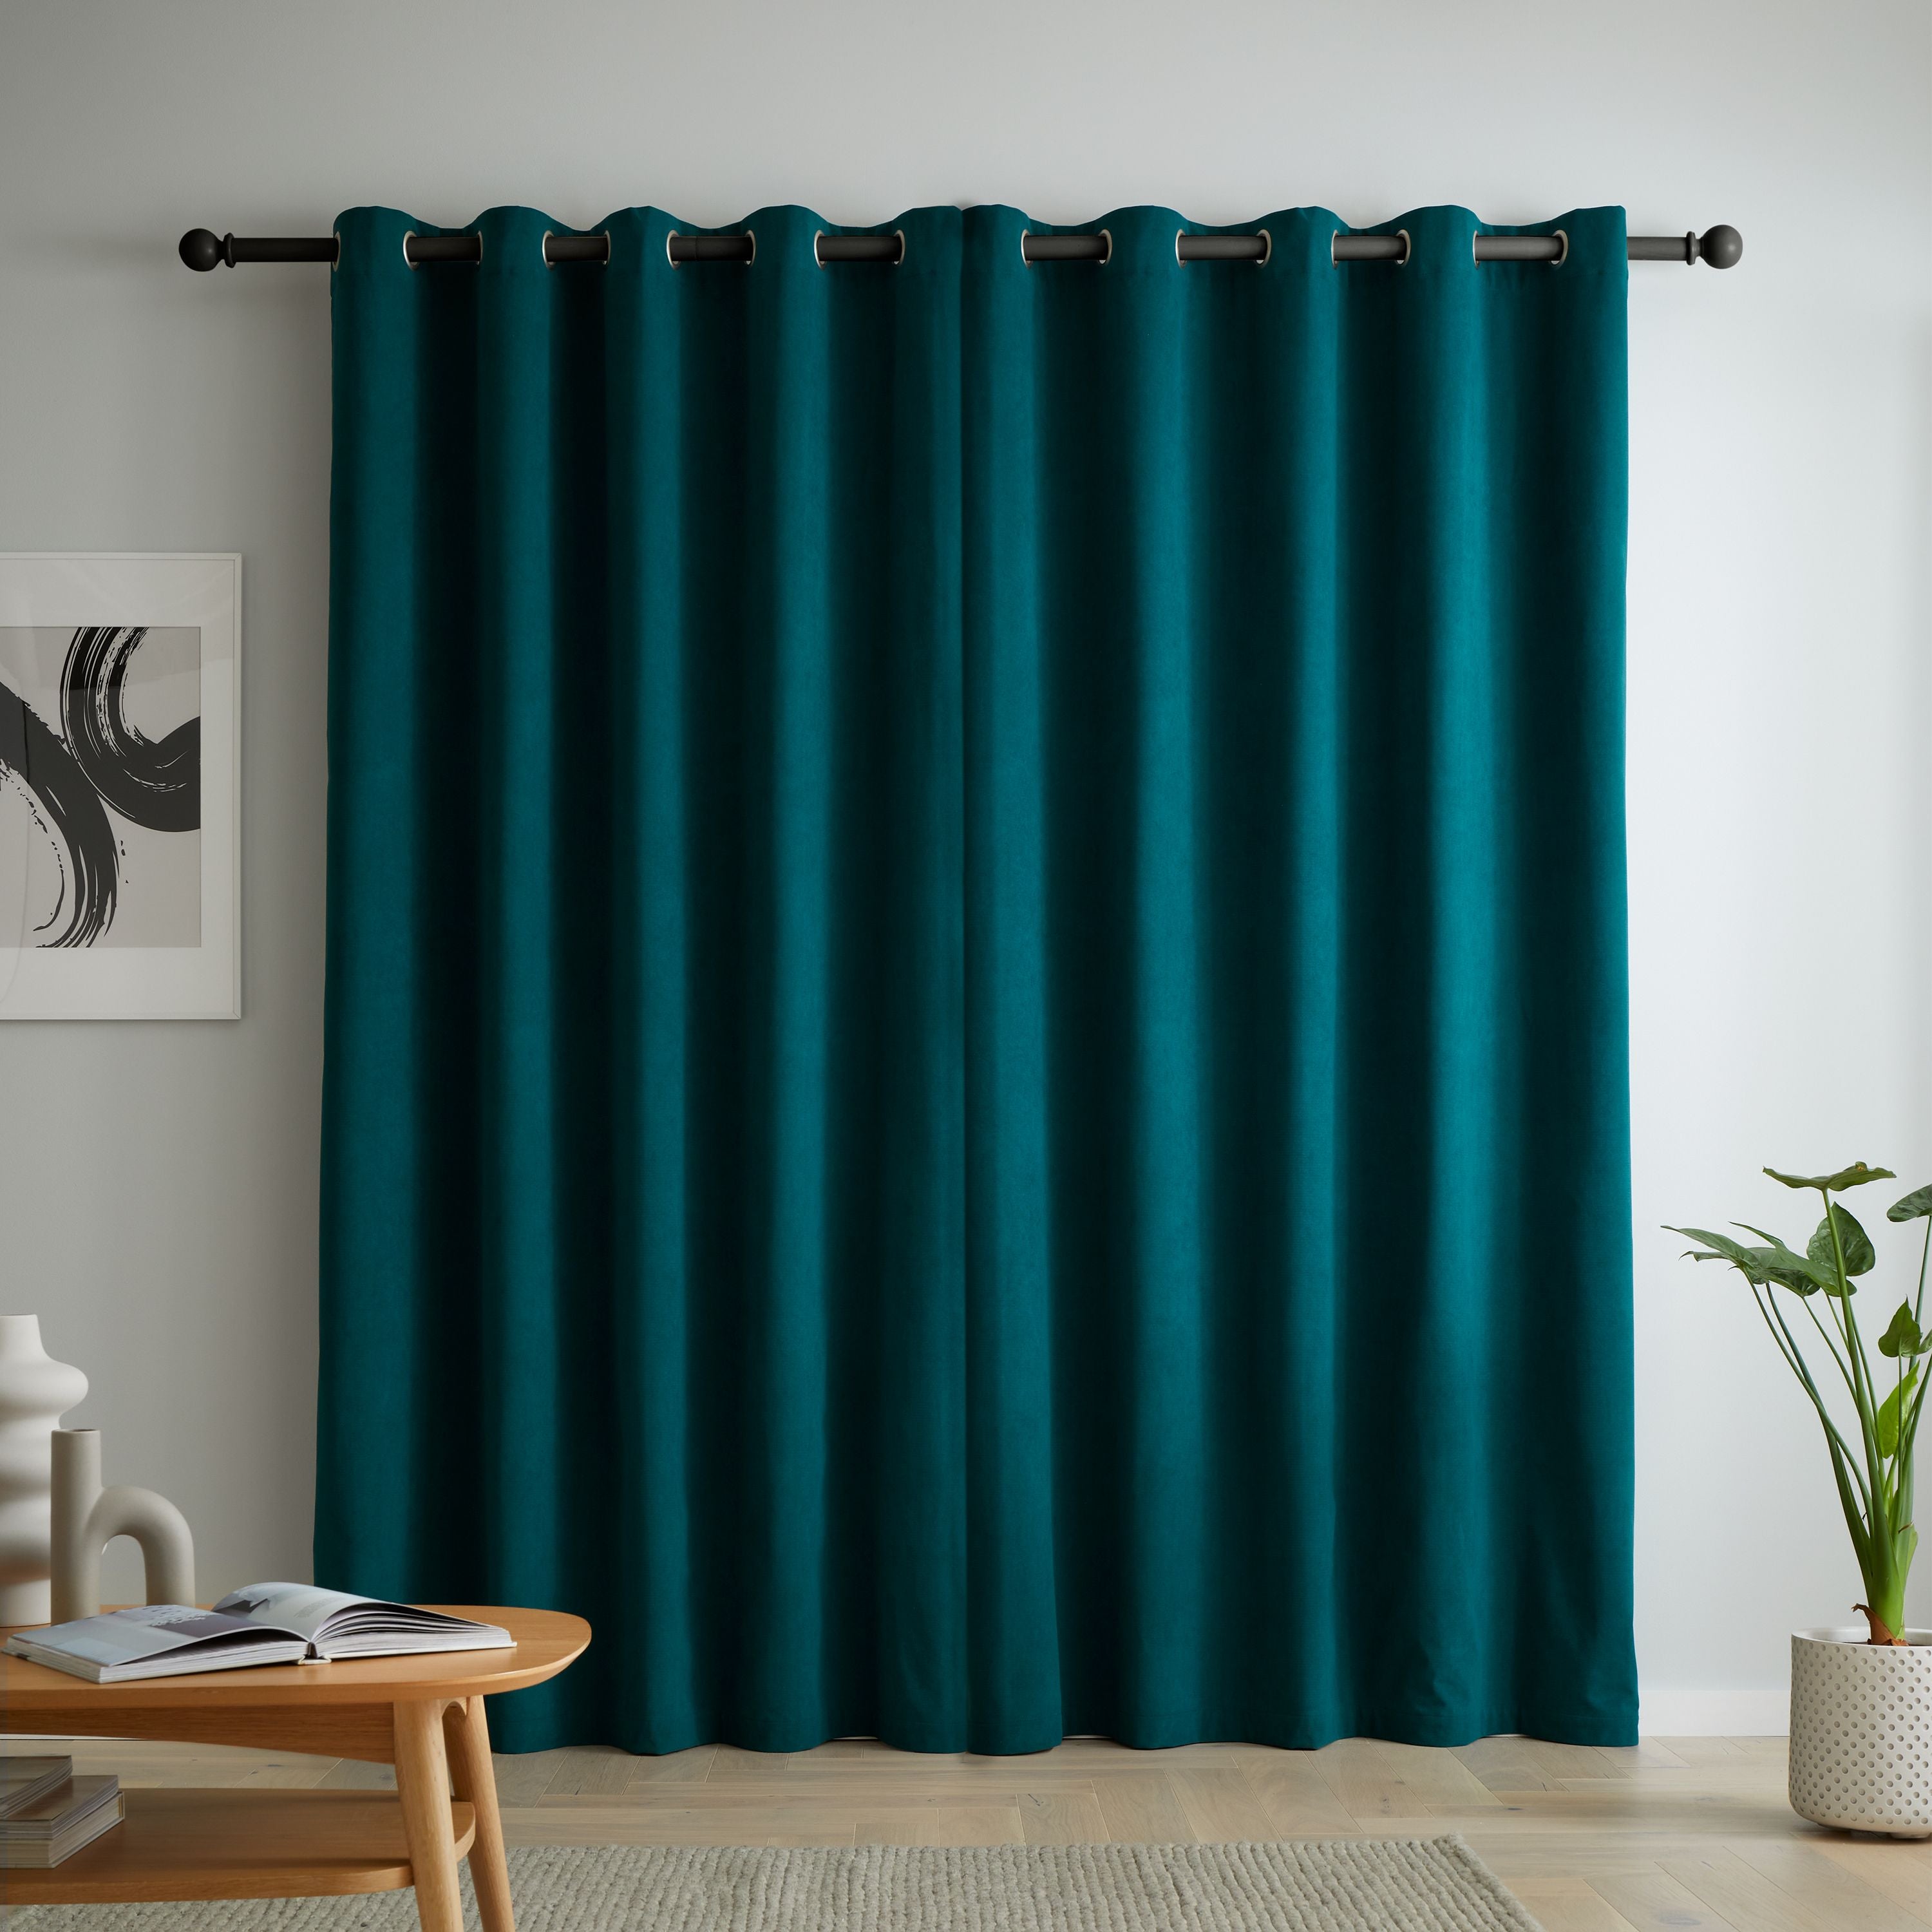 Wilson Blackout Thermal Eyelet Curtains, Teal